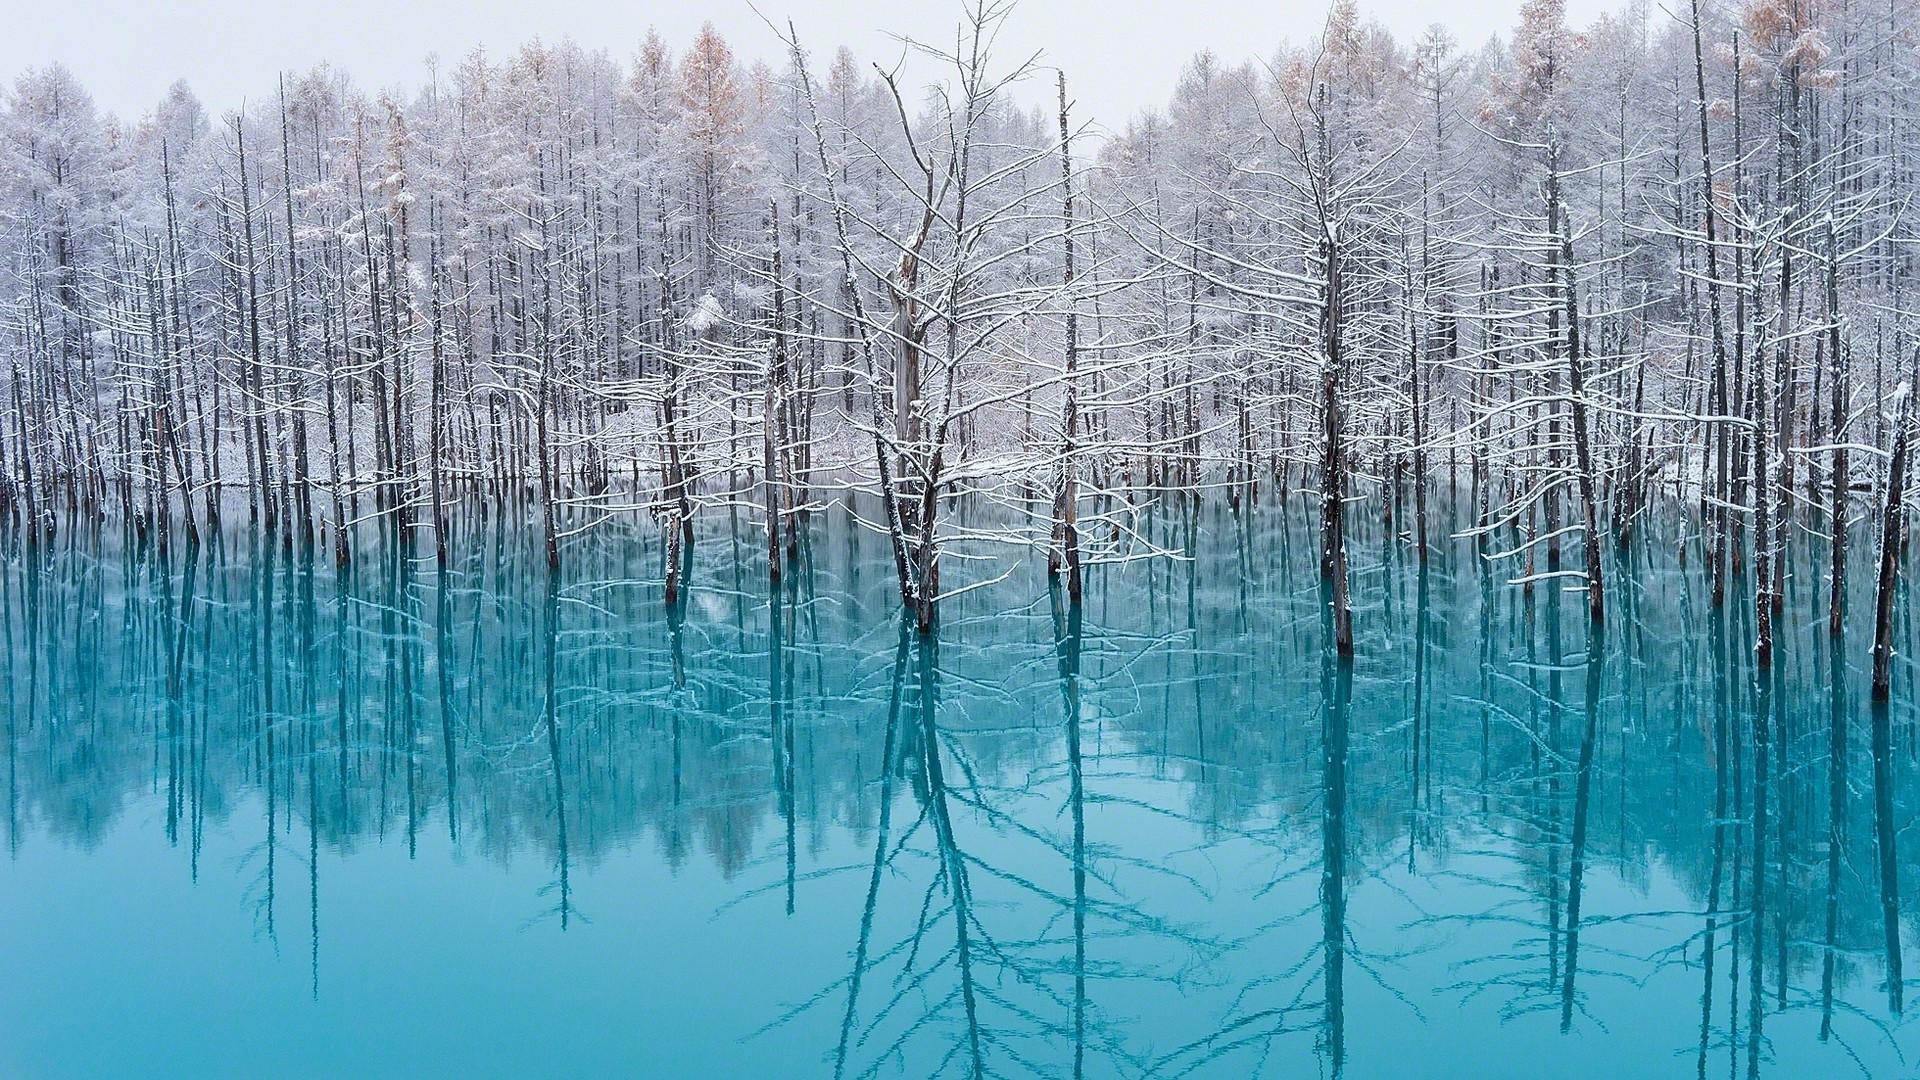 Lake, Trees, Nature, Turquoise, Water, Snow, Reflection